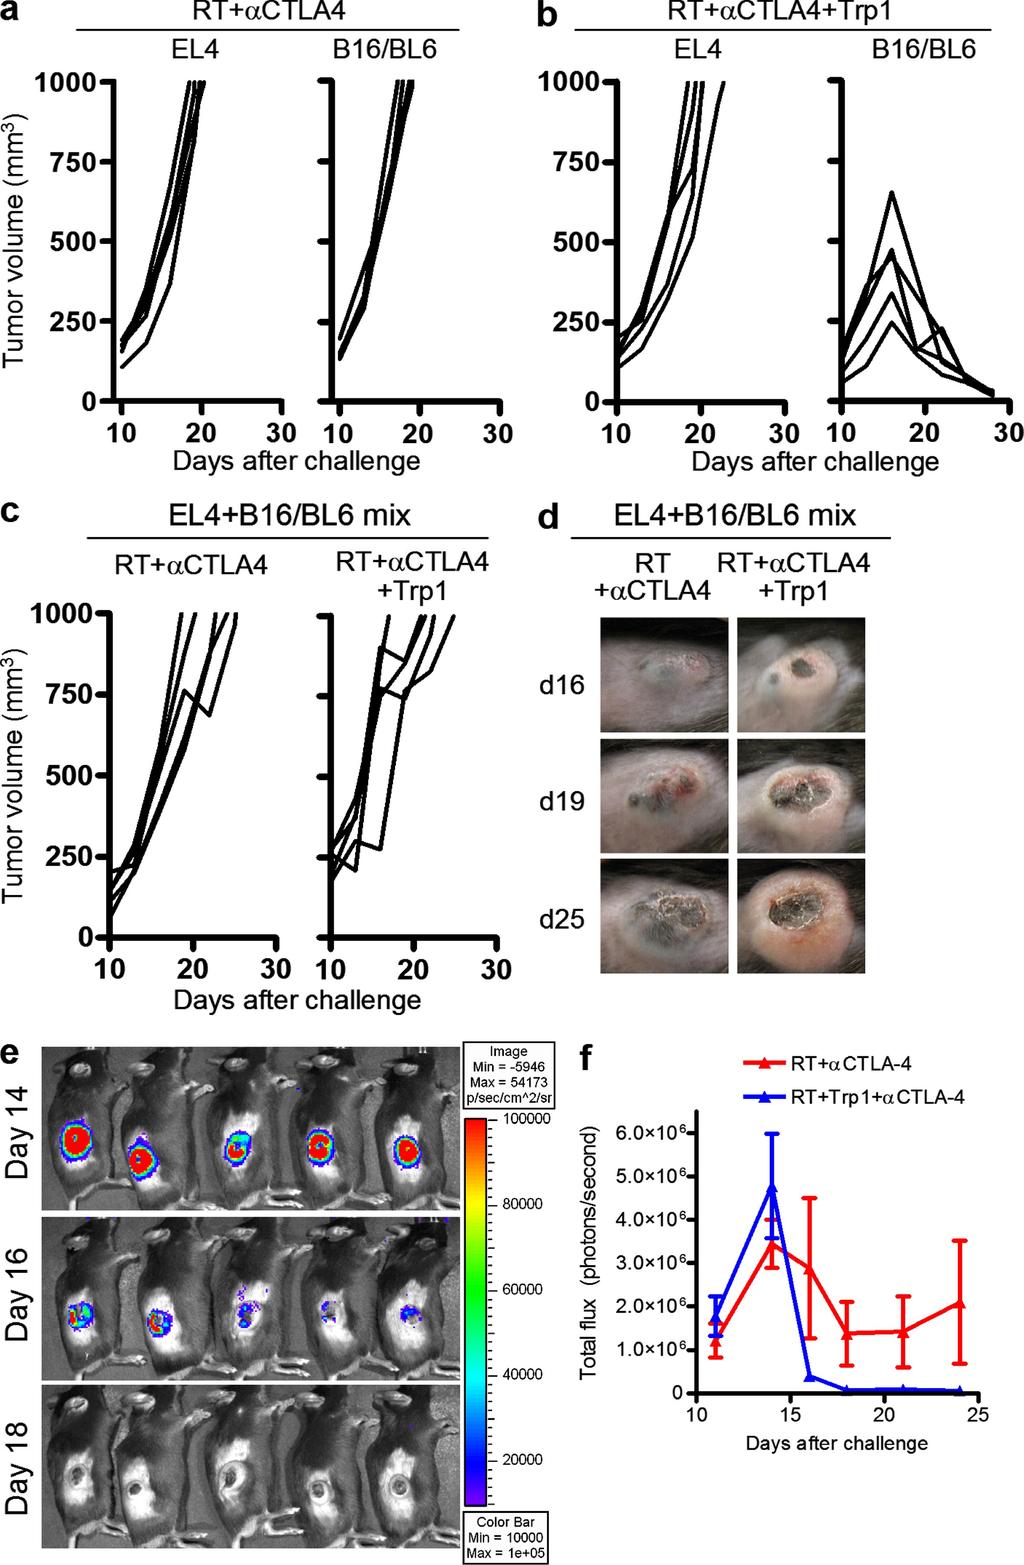 Published February 15, 2010 Ar ticle Triple therapy mediates tumor regression in a mouse model of spontaneous melanoma To test the efficacy of this new combinatorial therapy in a stringent and more